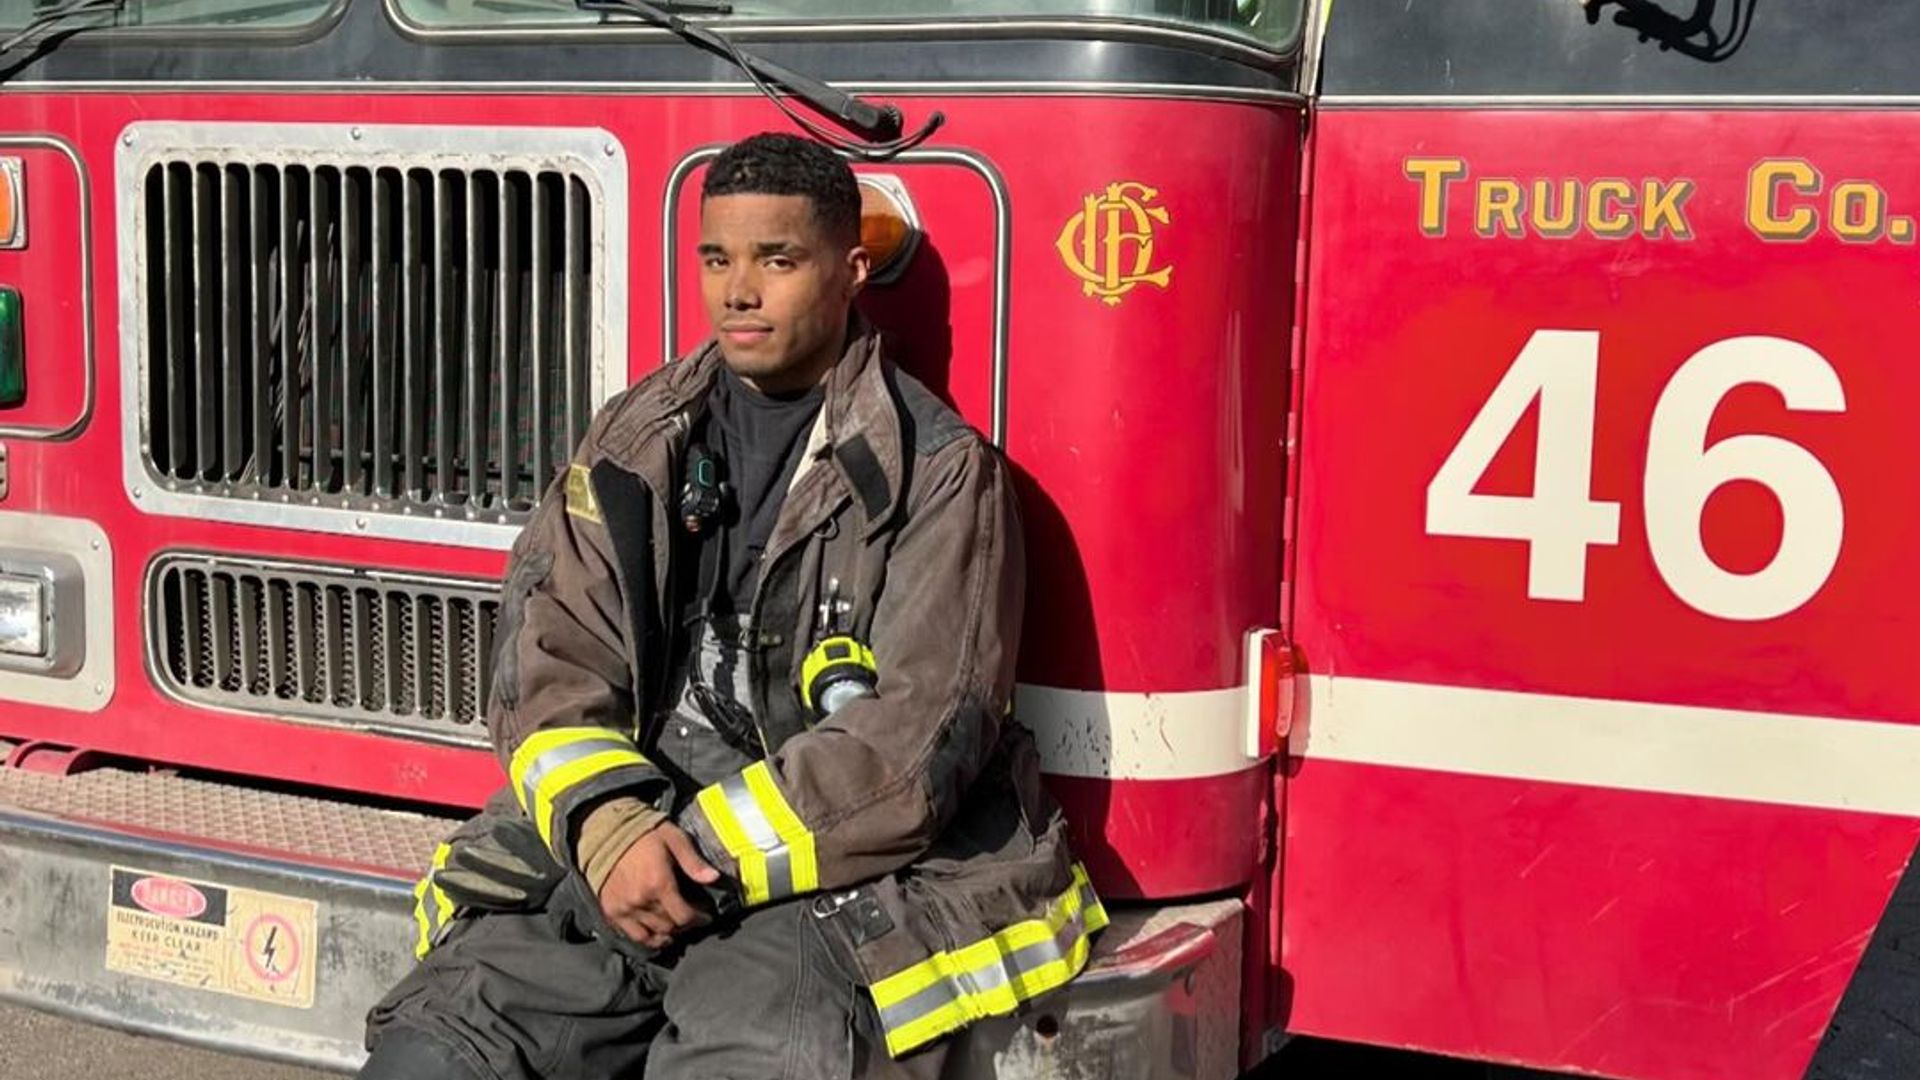 Rome Flynn left Chicago Fire after six episodes